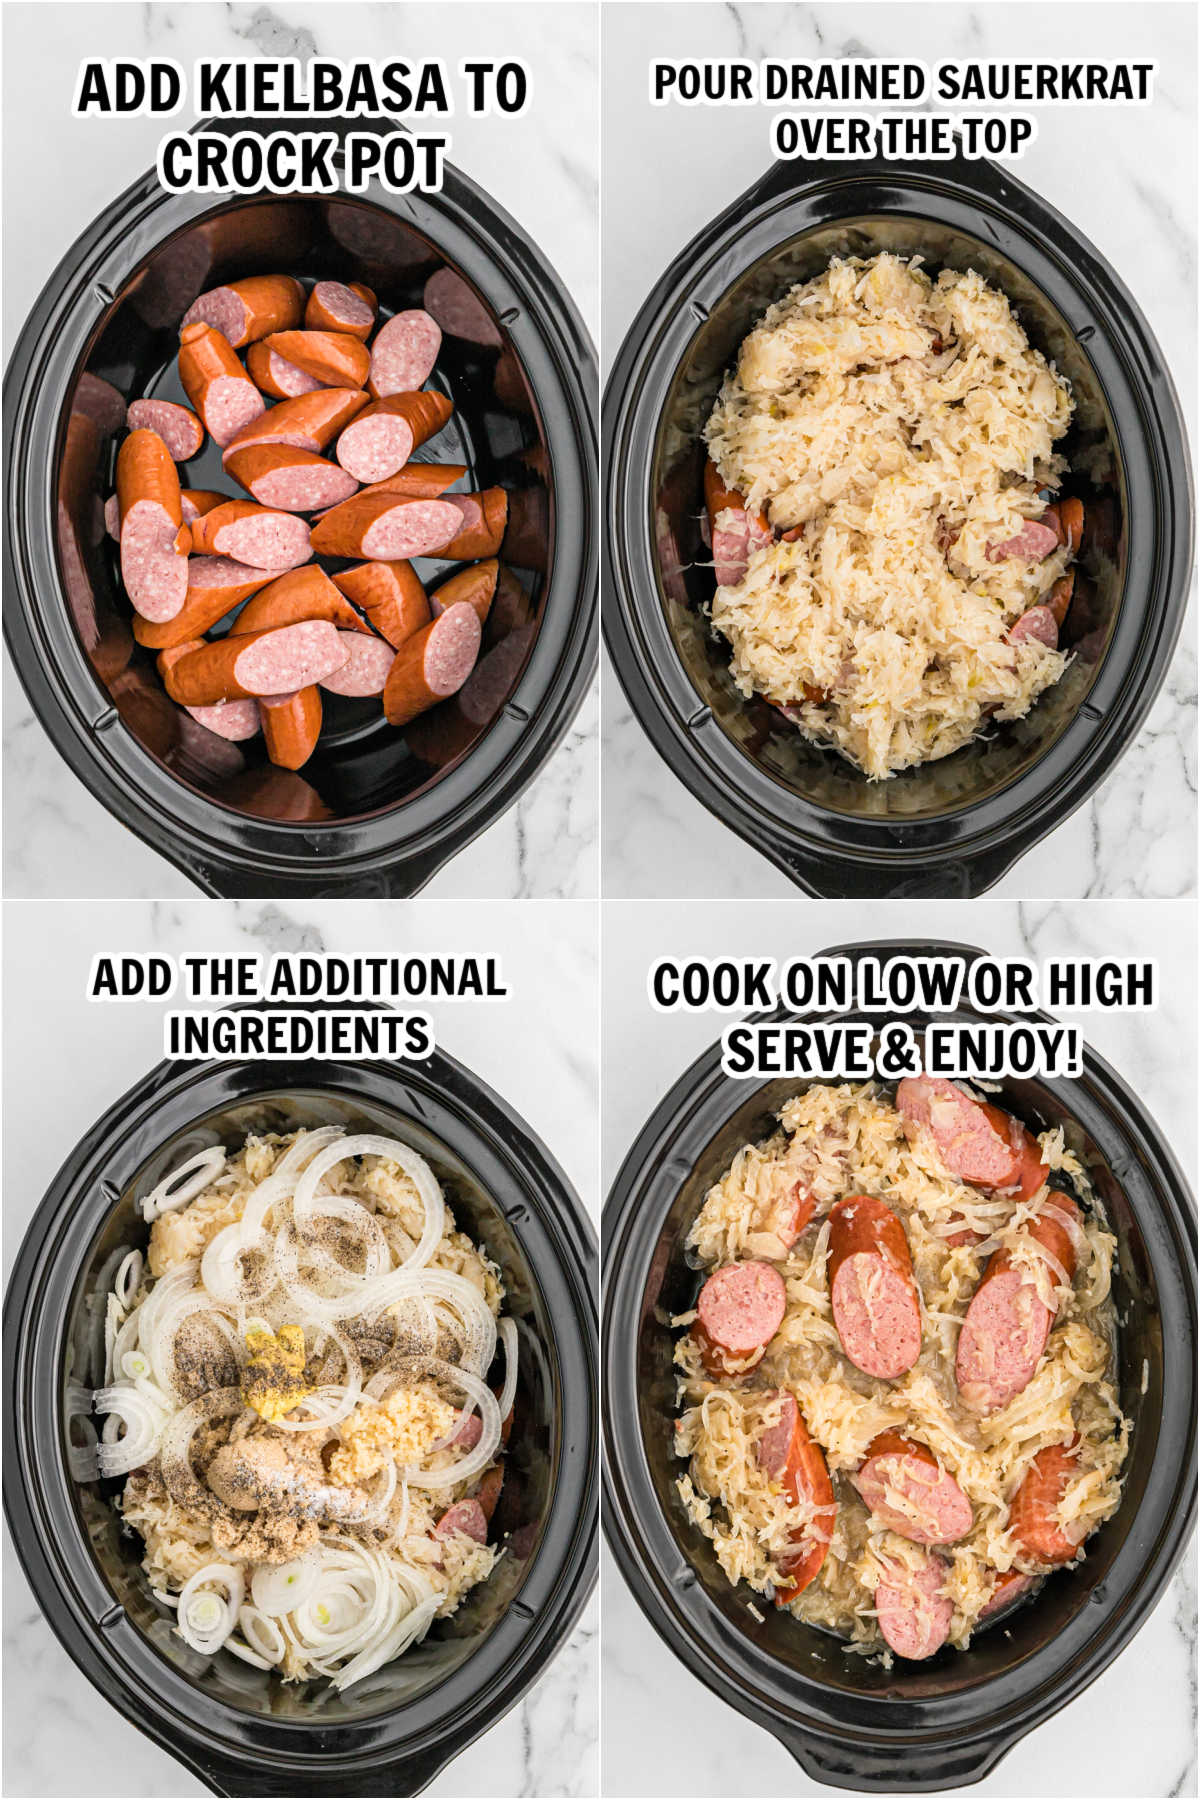 The process of adding the ingredients to the slow cooker and cooking